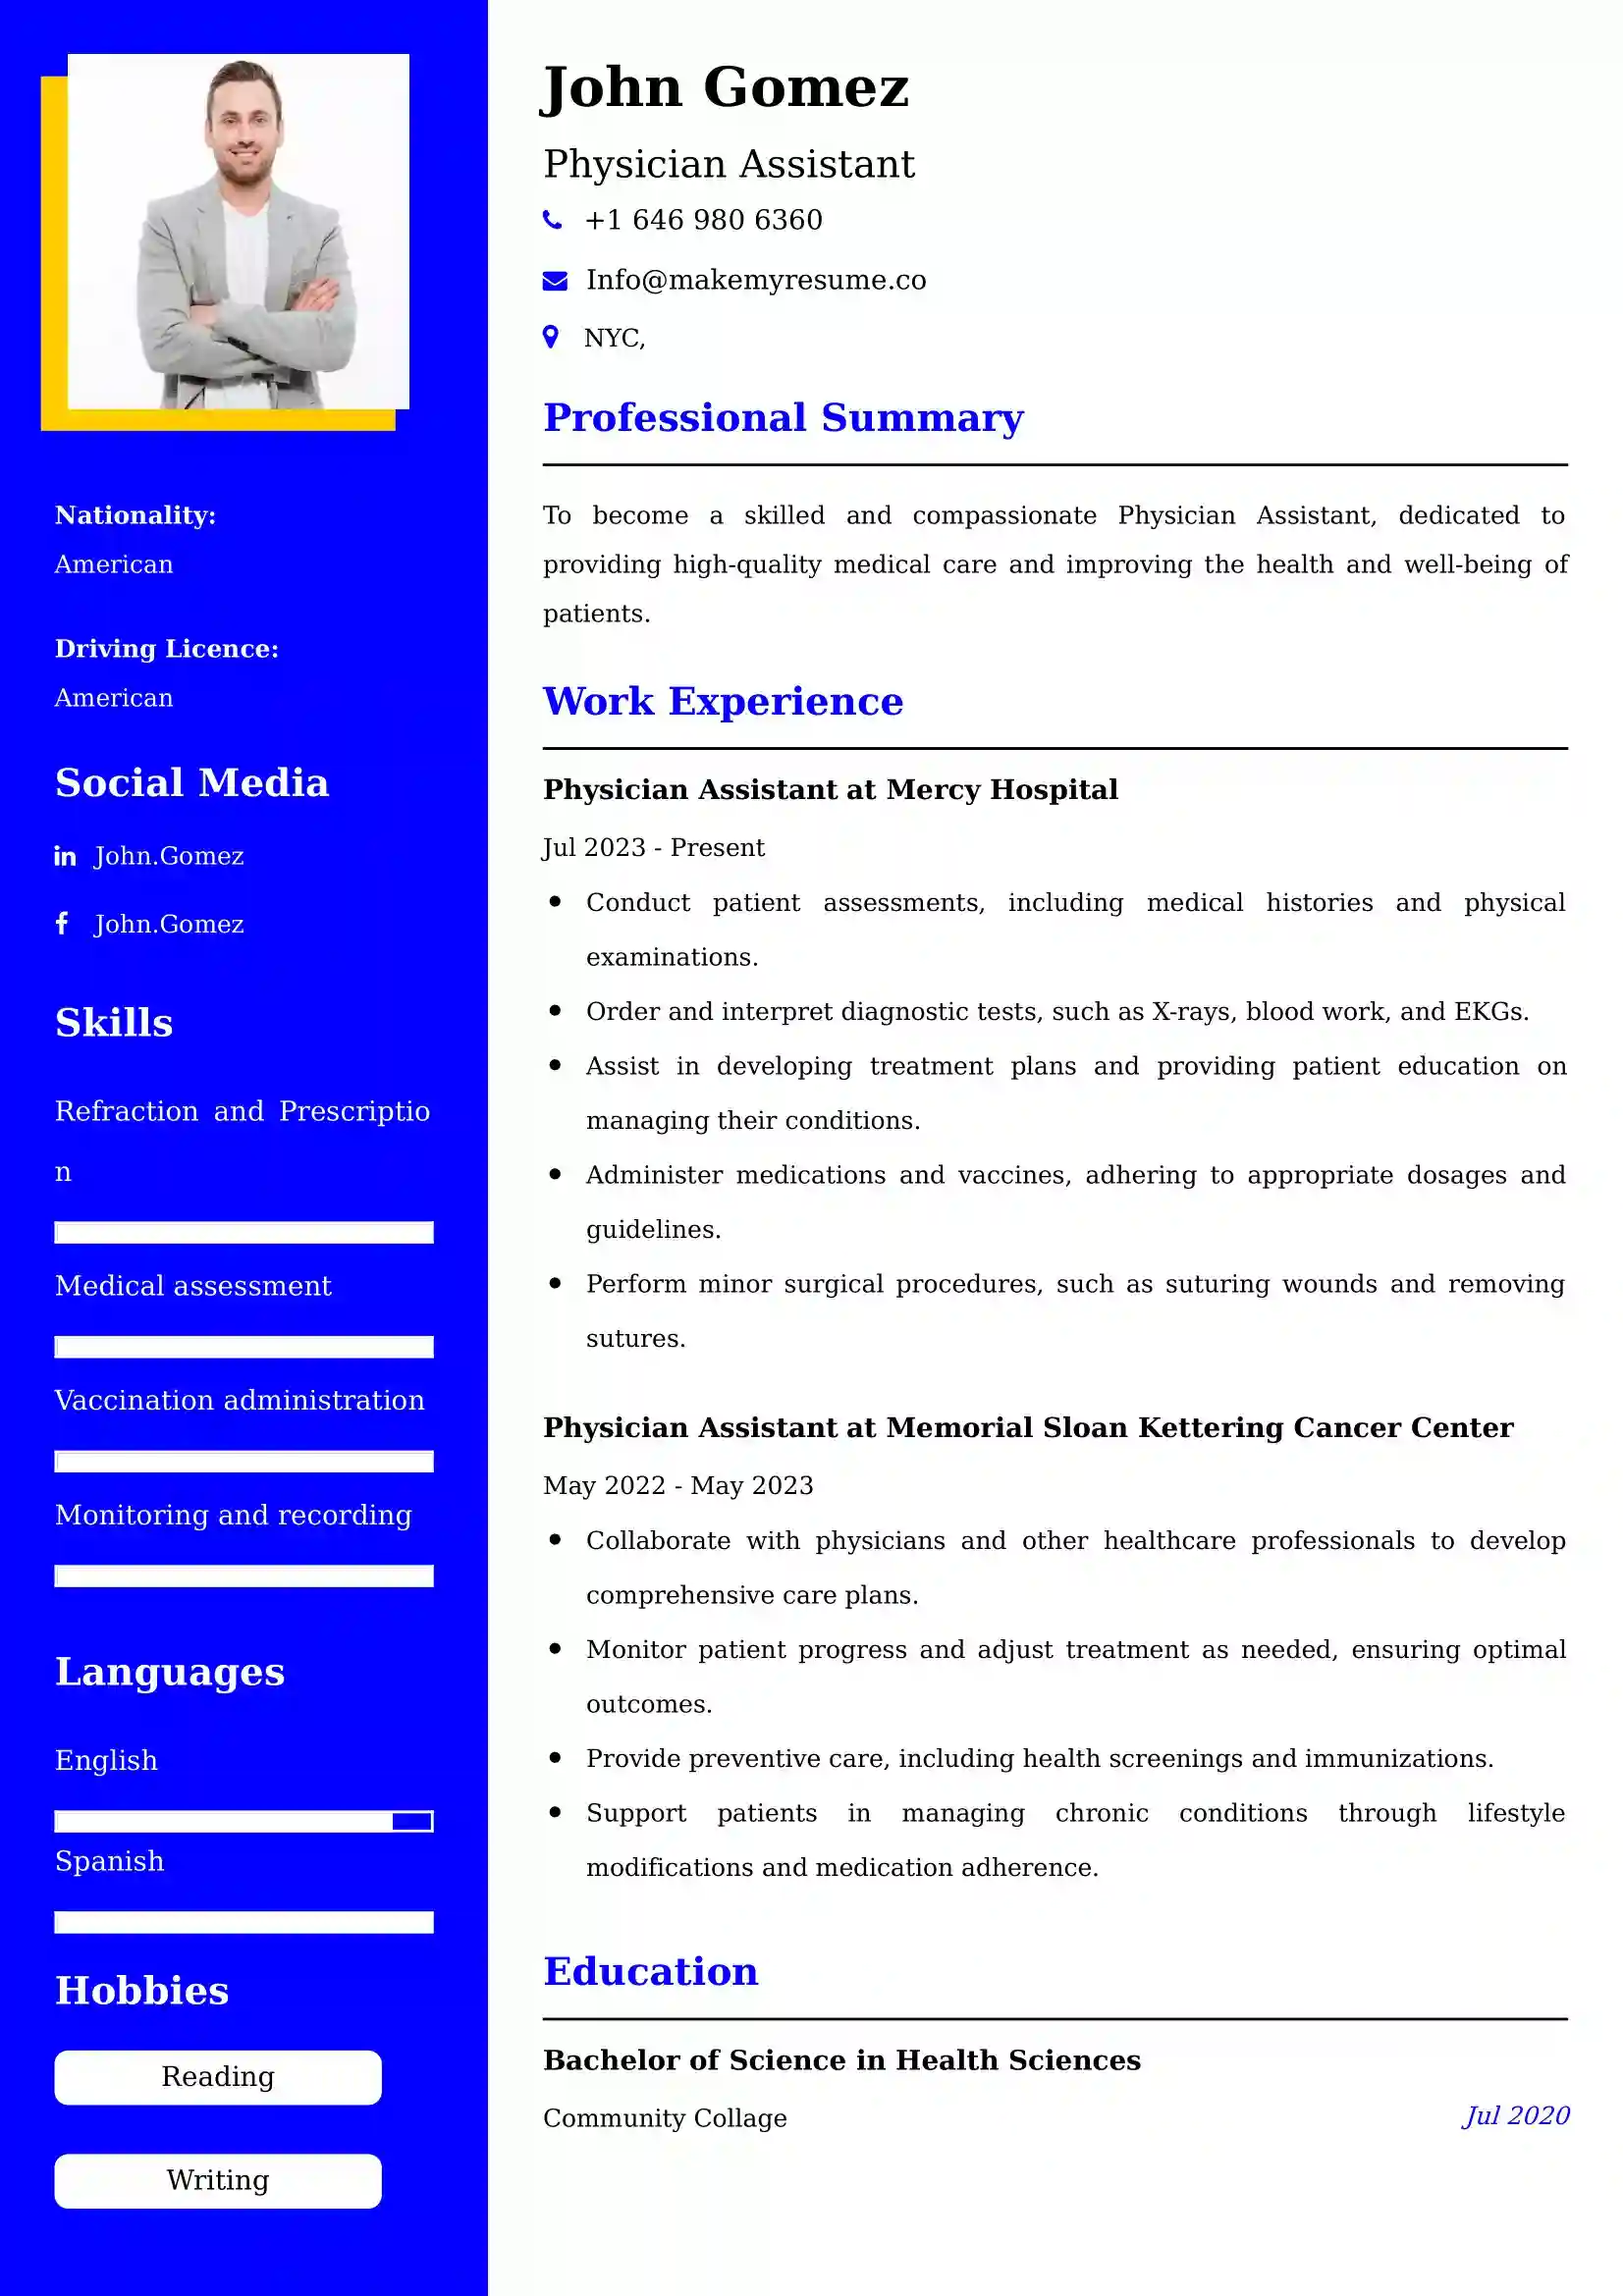 Physician Assistant Resume Examples - Brazilian Format, Latest Template